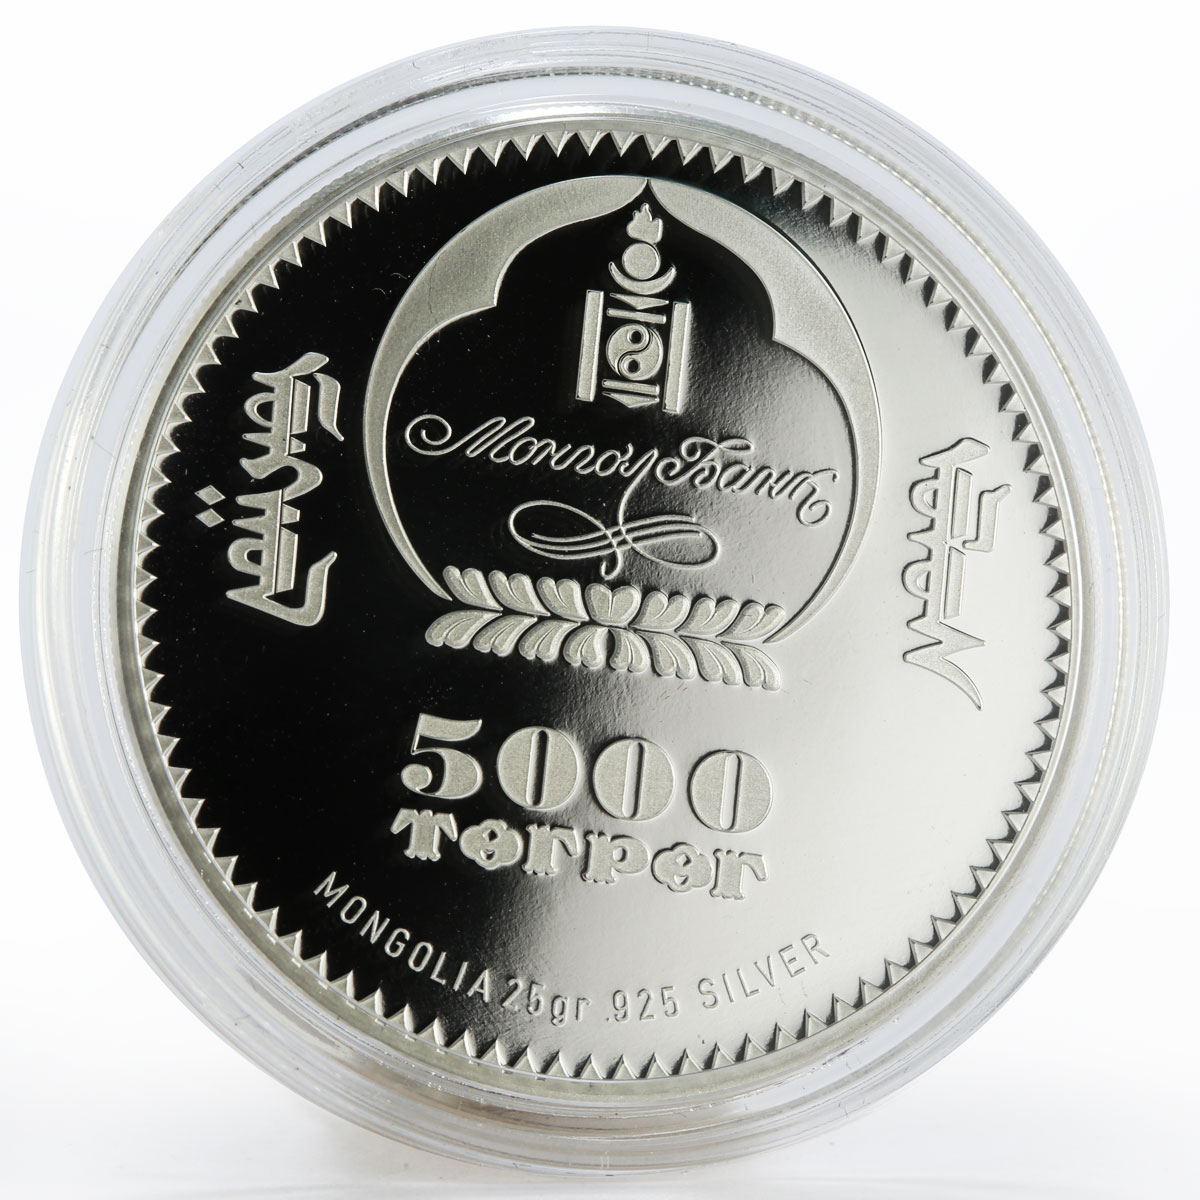 Mongolia 5000 togrog Undur Gegeen G. Zanabazar colored proof silver coin 2015